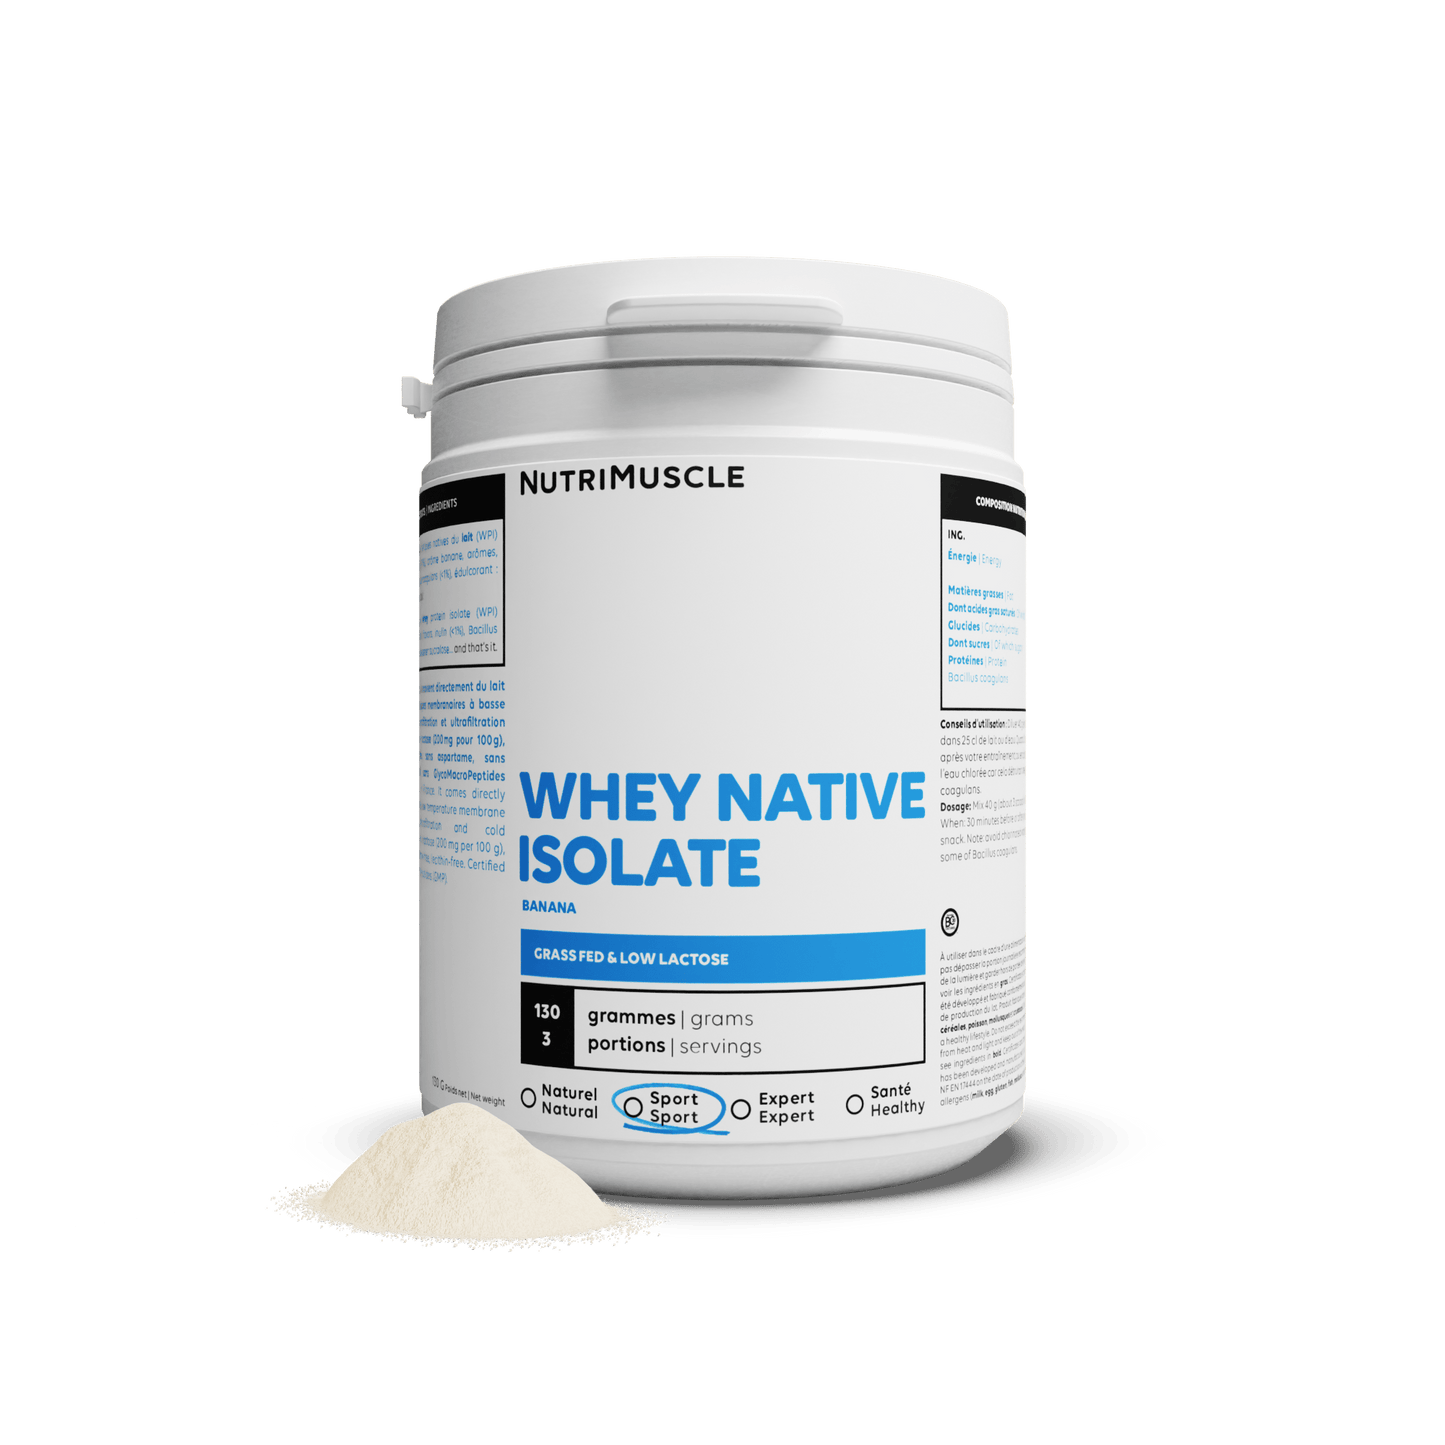 Nutrimuscle Protéines Banane / 130 g Whey Native Isolate (Low lactose)